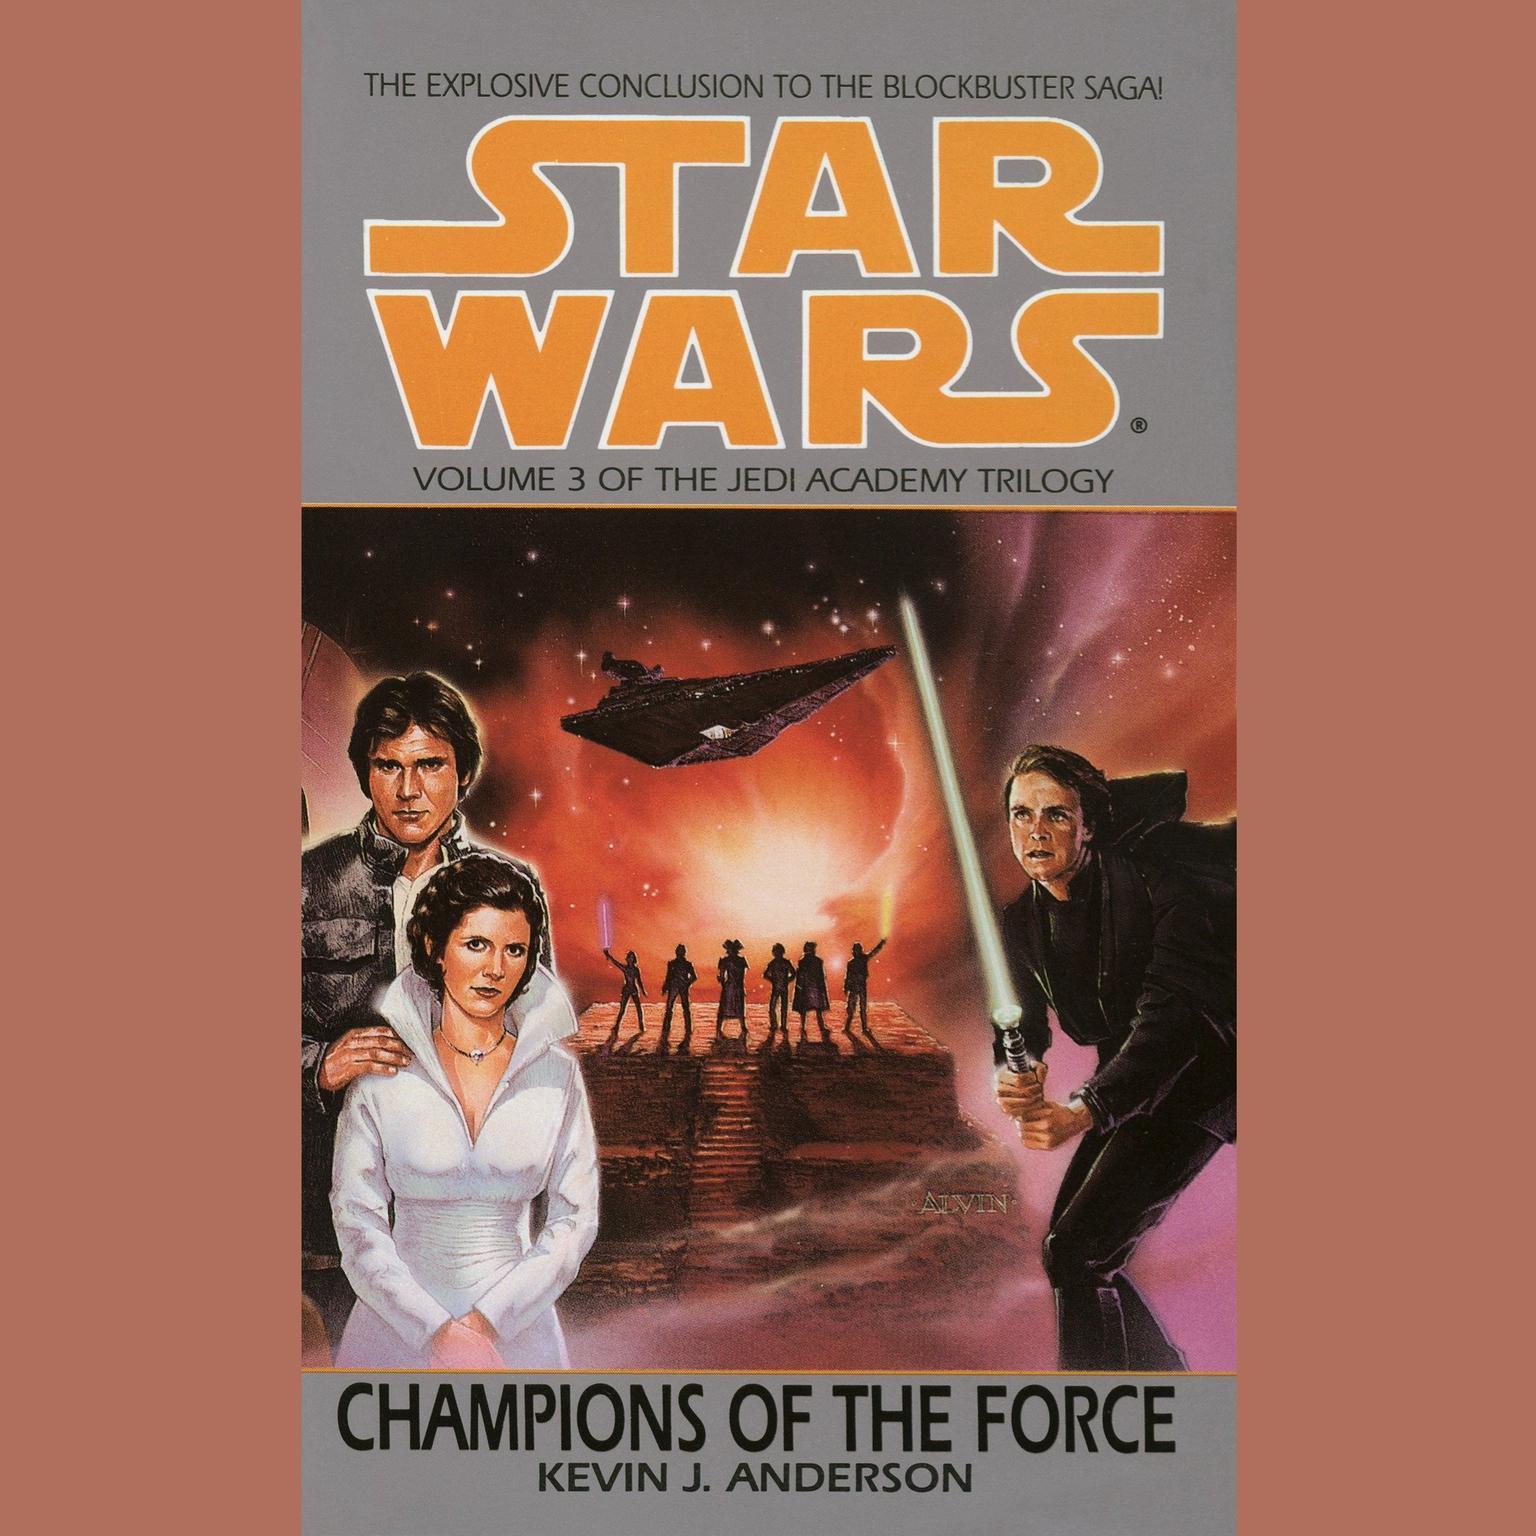 Star Wars: The Jedi Academy: Champions of the Force (Abridged): Volume 3 Audiobook, by Kevin J. Anderson